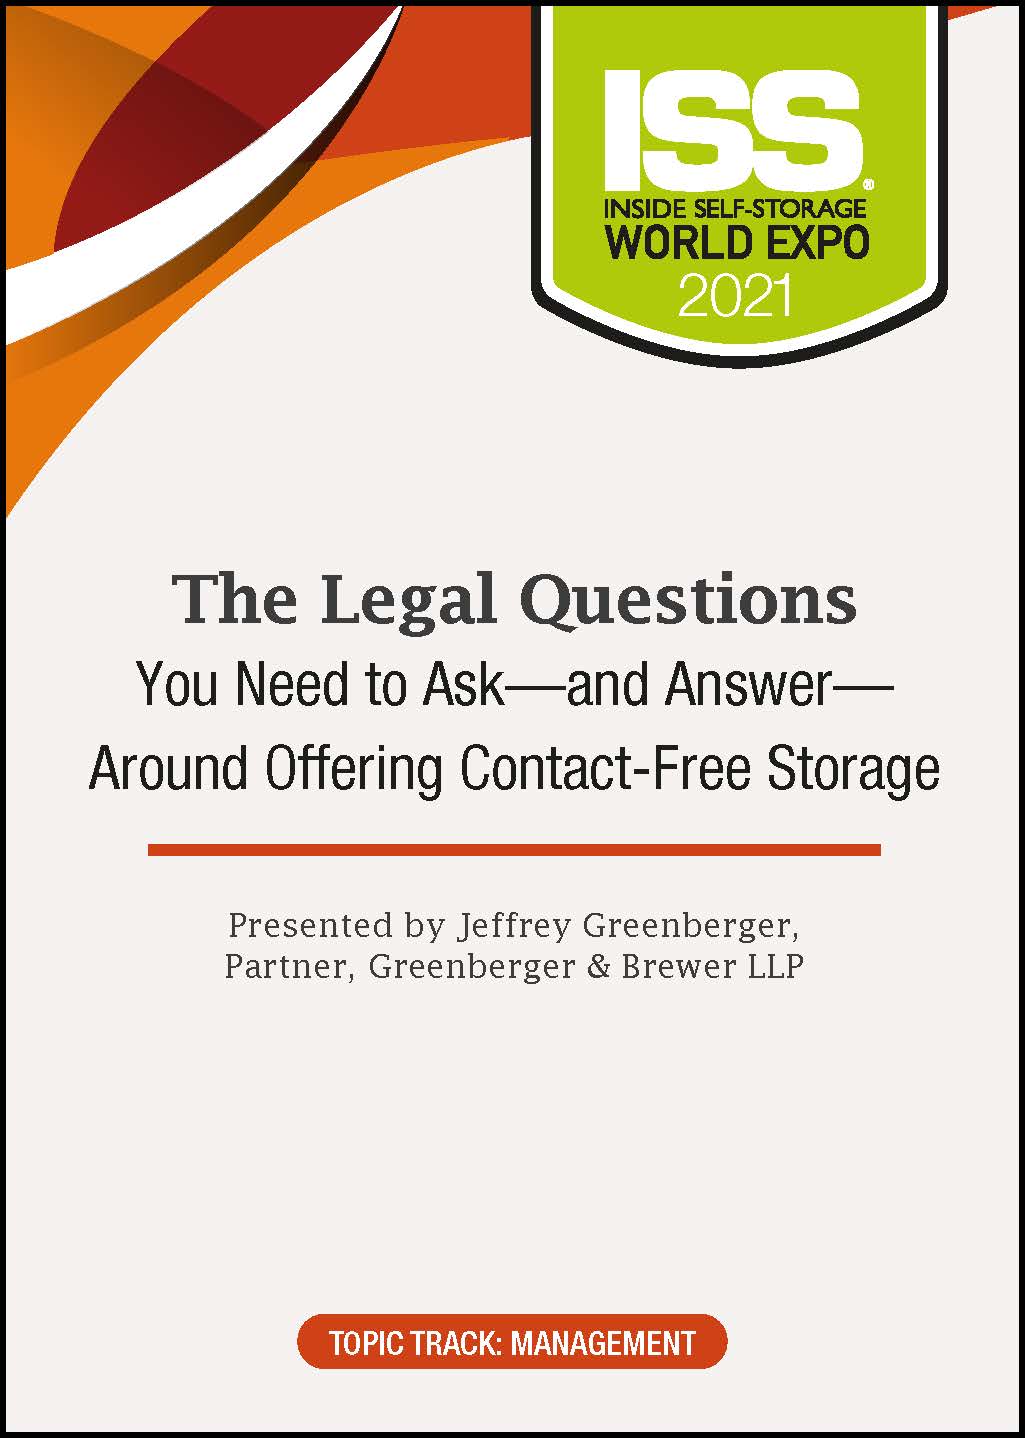 The Legal Questions You Need to Ask—and Answer—Around Offering Contact-Free Storage